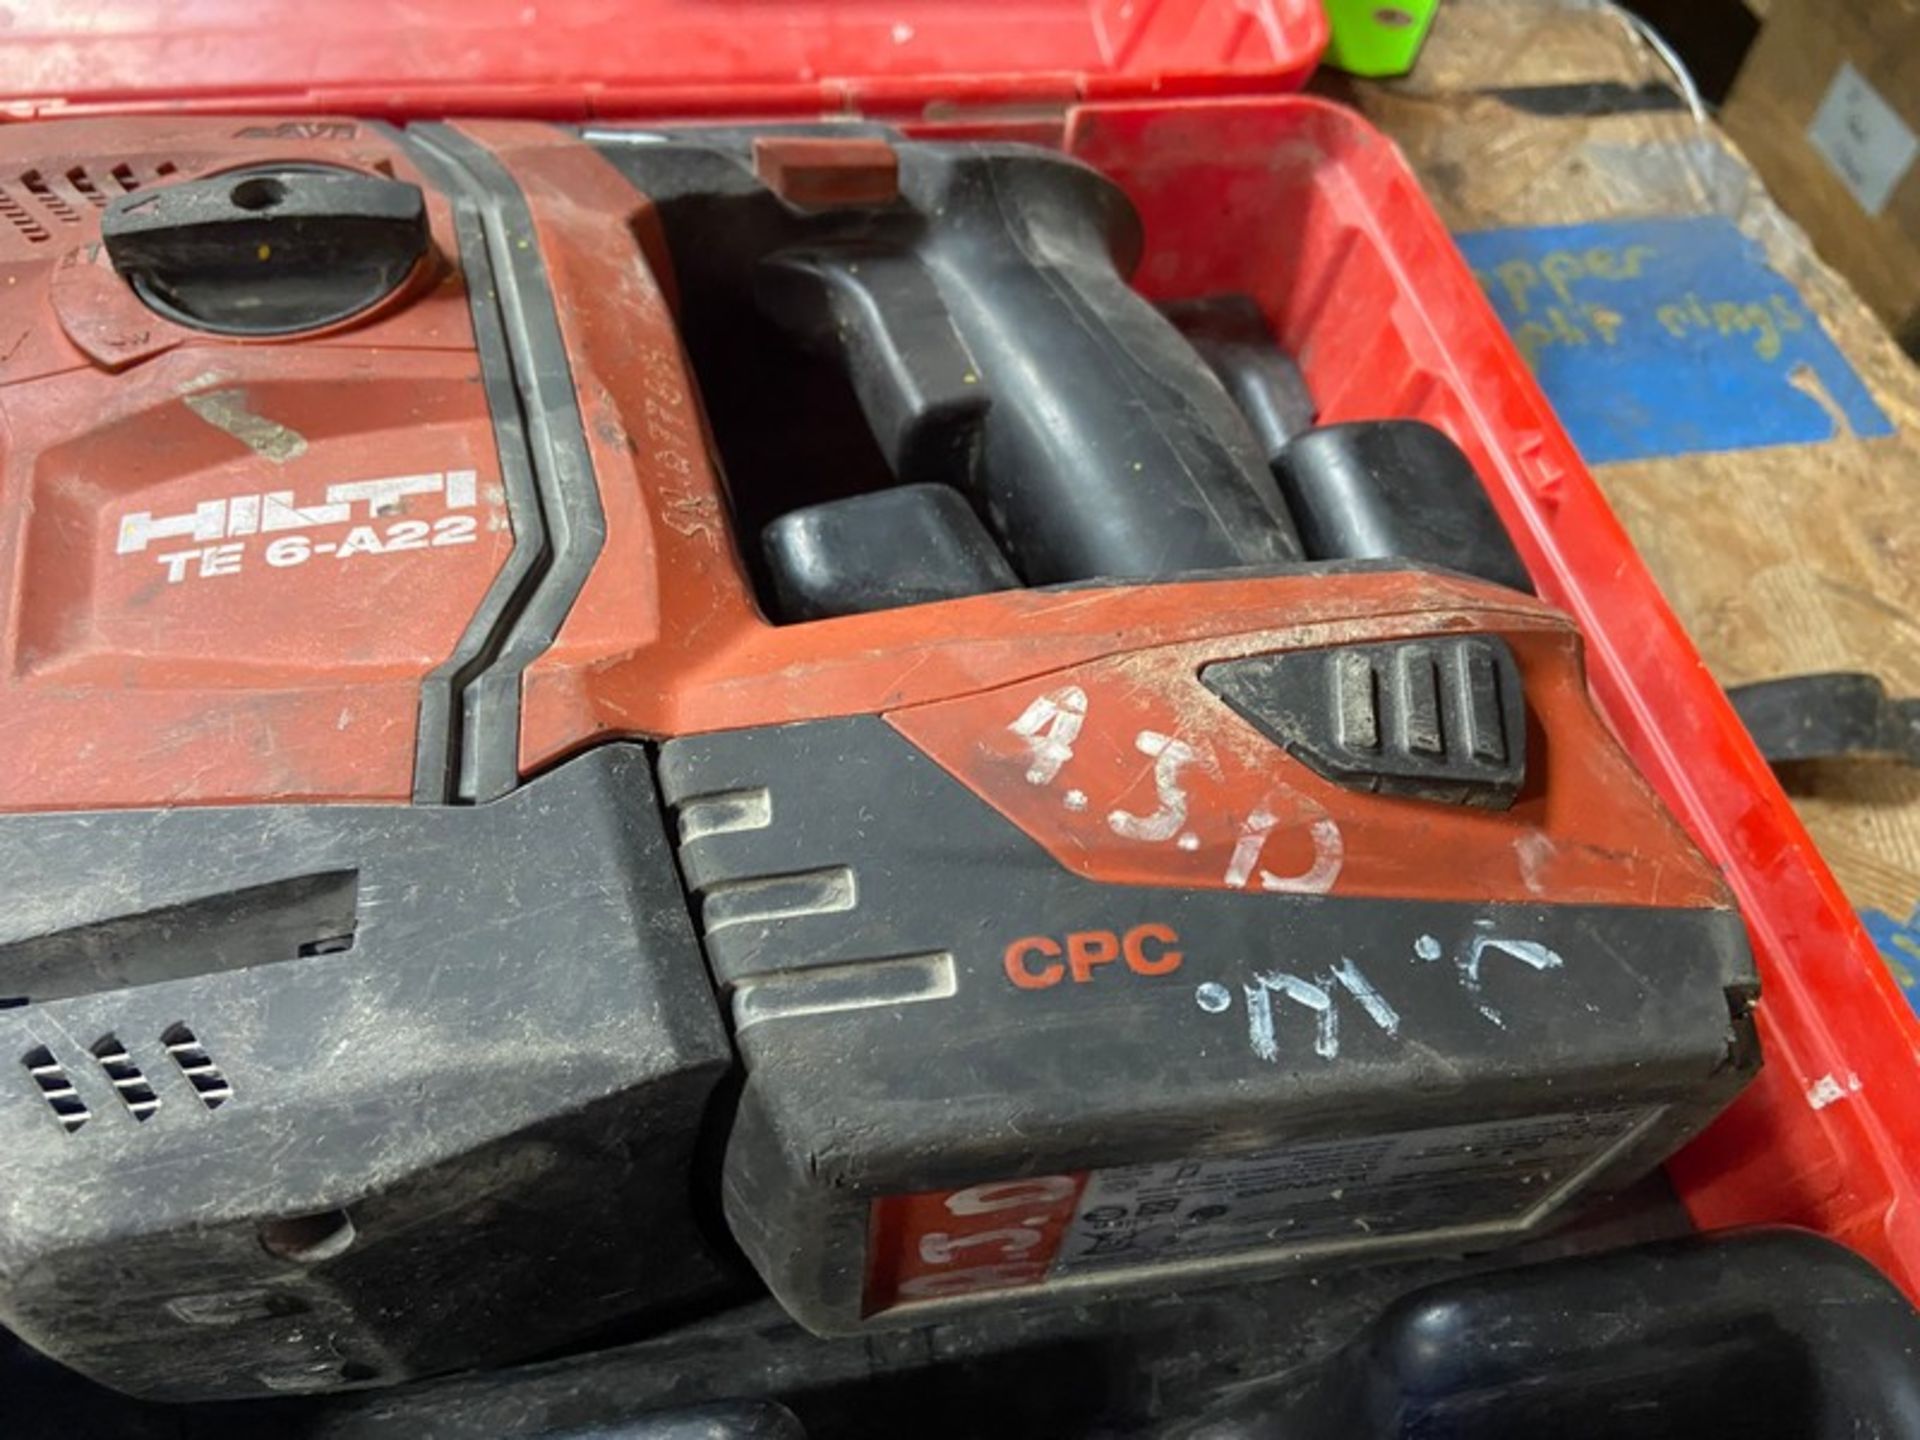 HILTI Cordless Rotary Hammer, M/N TE 6-A22, Includes Dust Removal System, M/N TETS-6-71-CA, with - Bild 5 aus 14